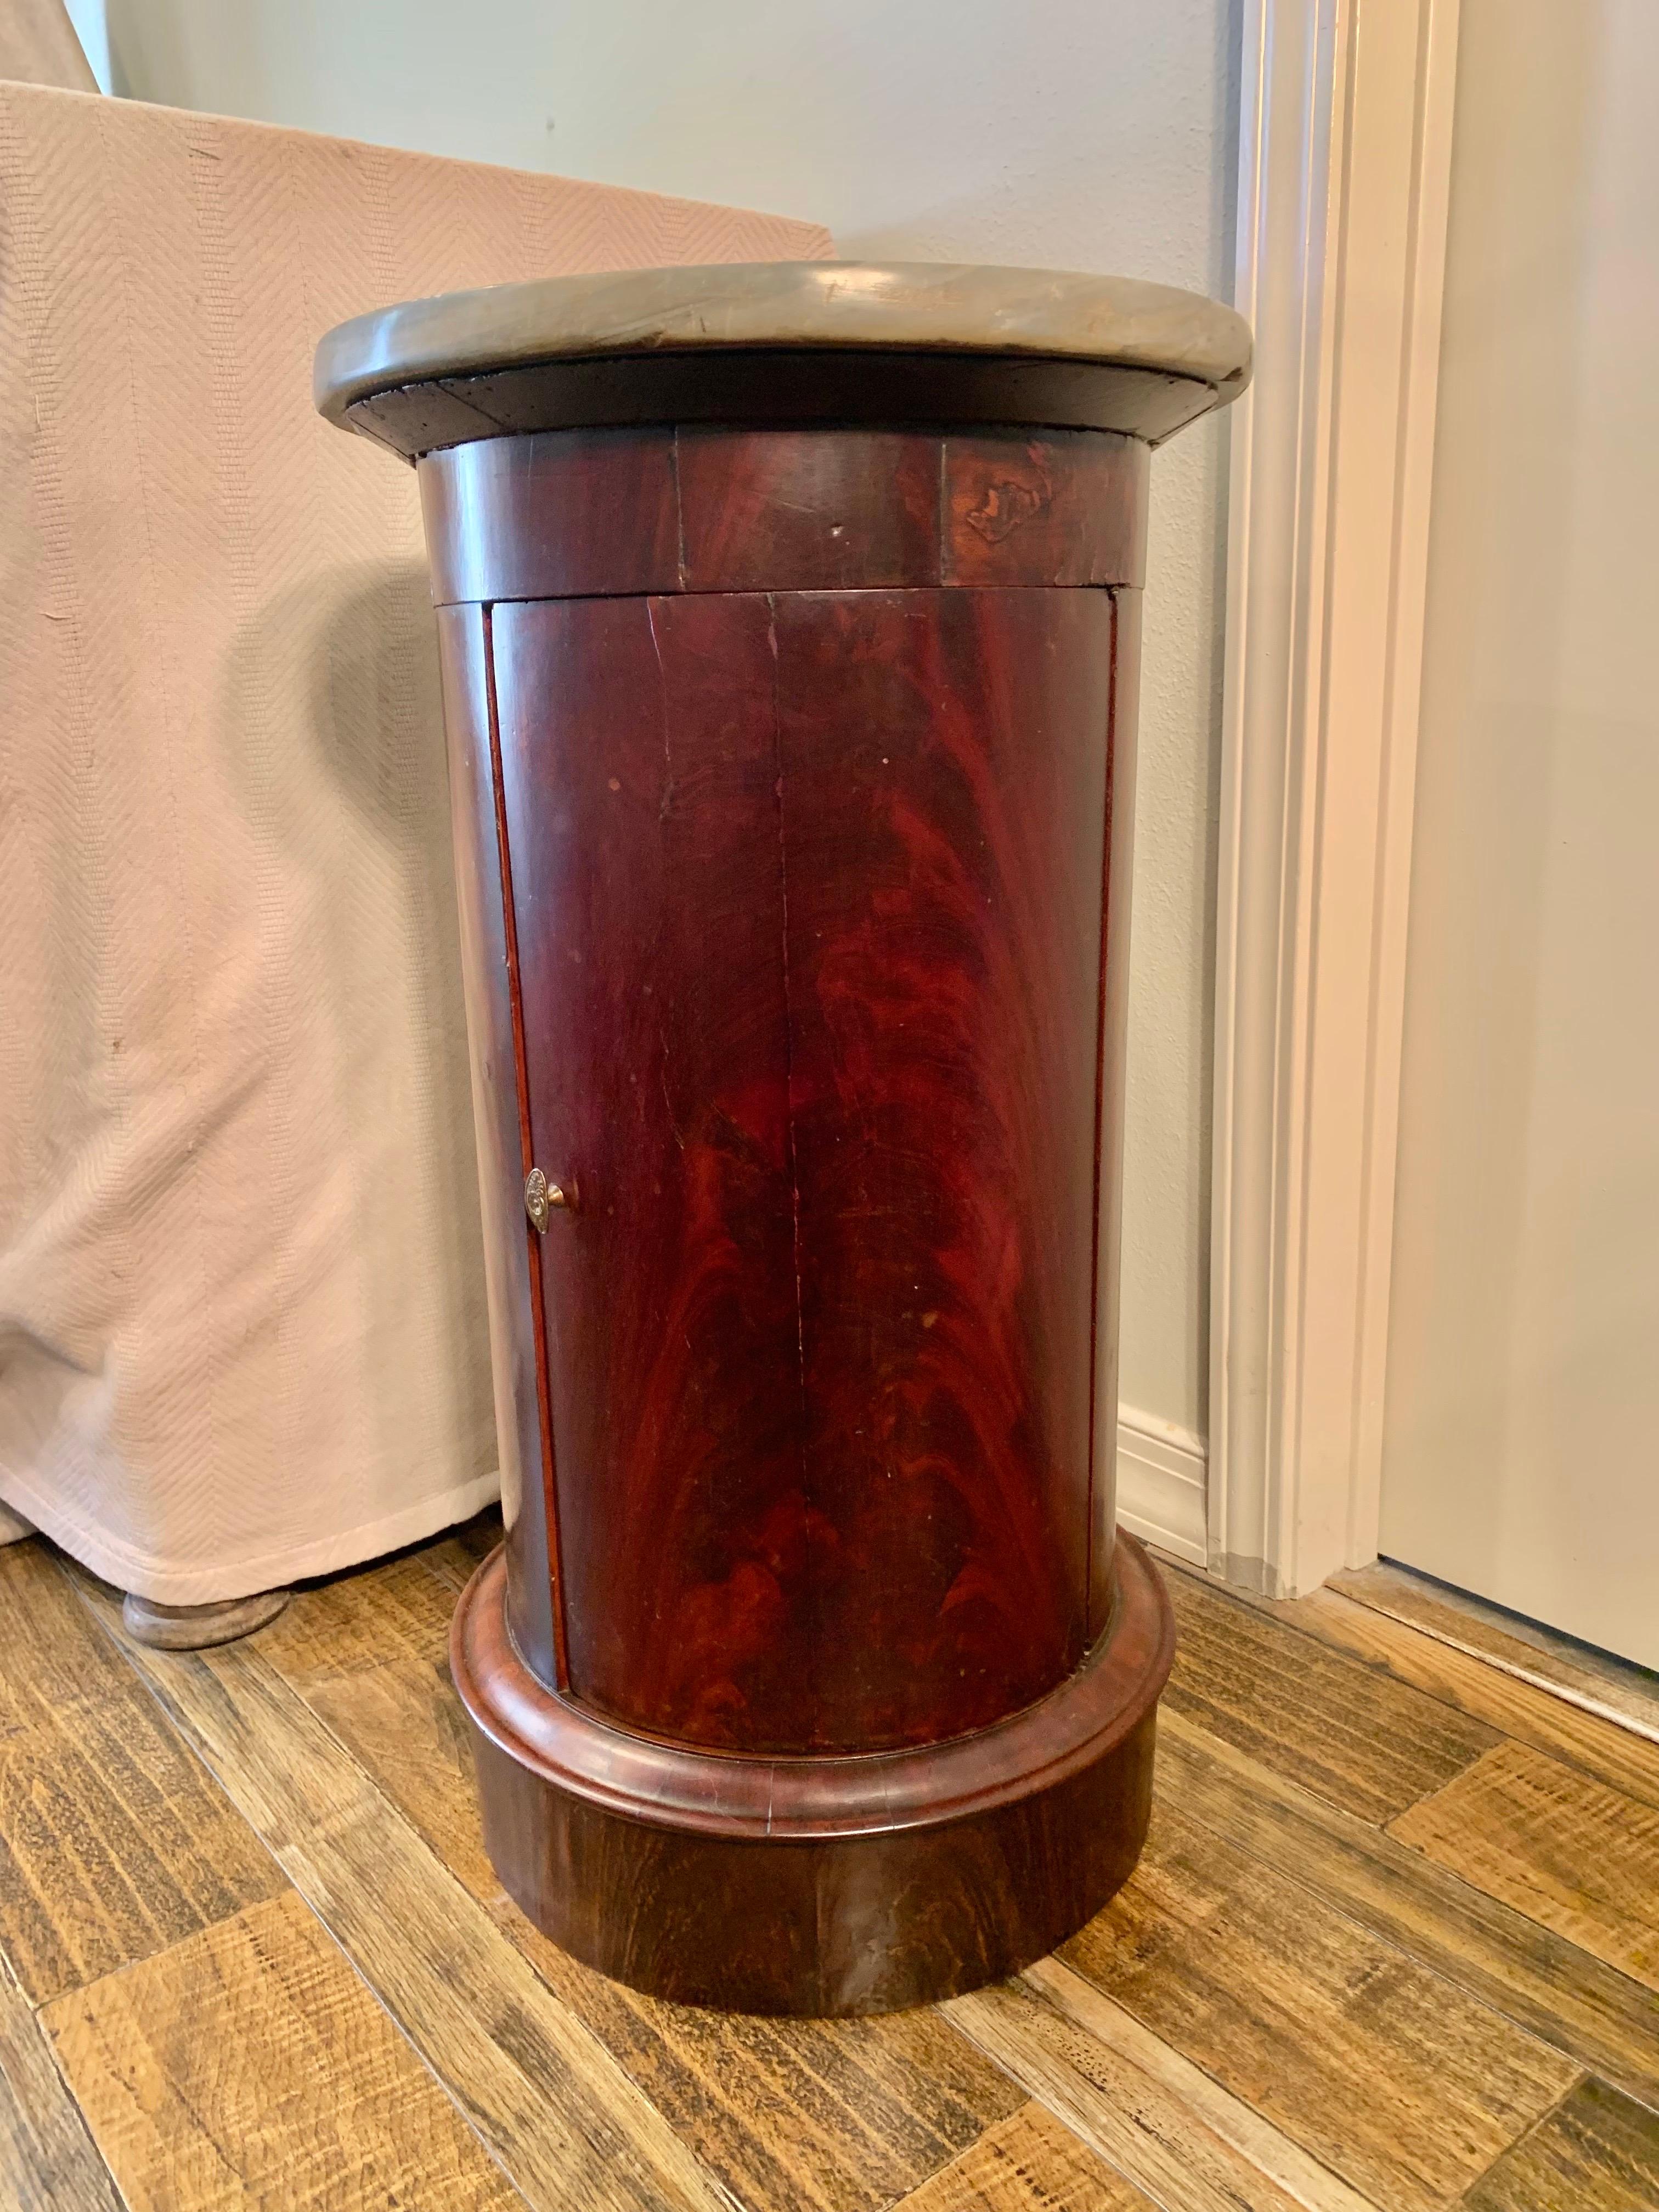 Found in the South of France this 19th Century French mahogany marble top somno or drum table features a hinged curved door with brass pull. The door opens to reveal two shelves. The cylindrical form and clean lines of the piece lend a refined yet